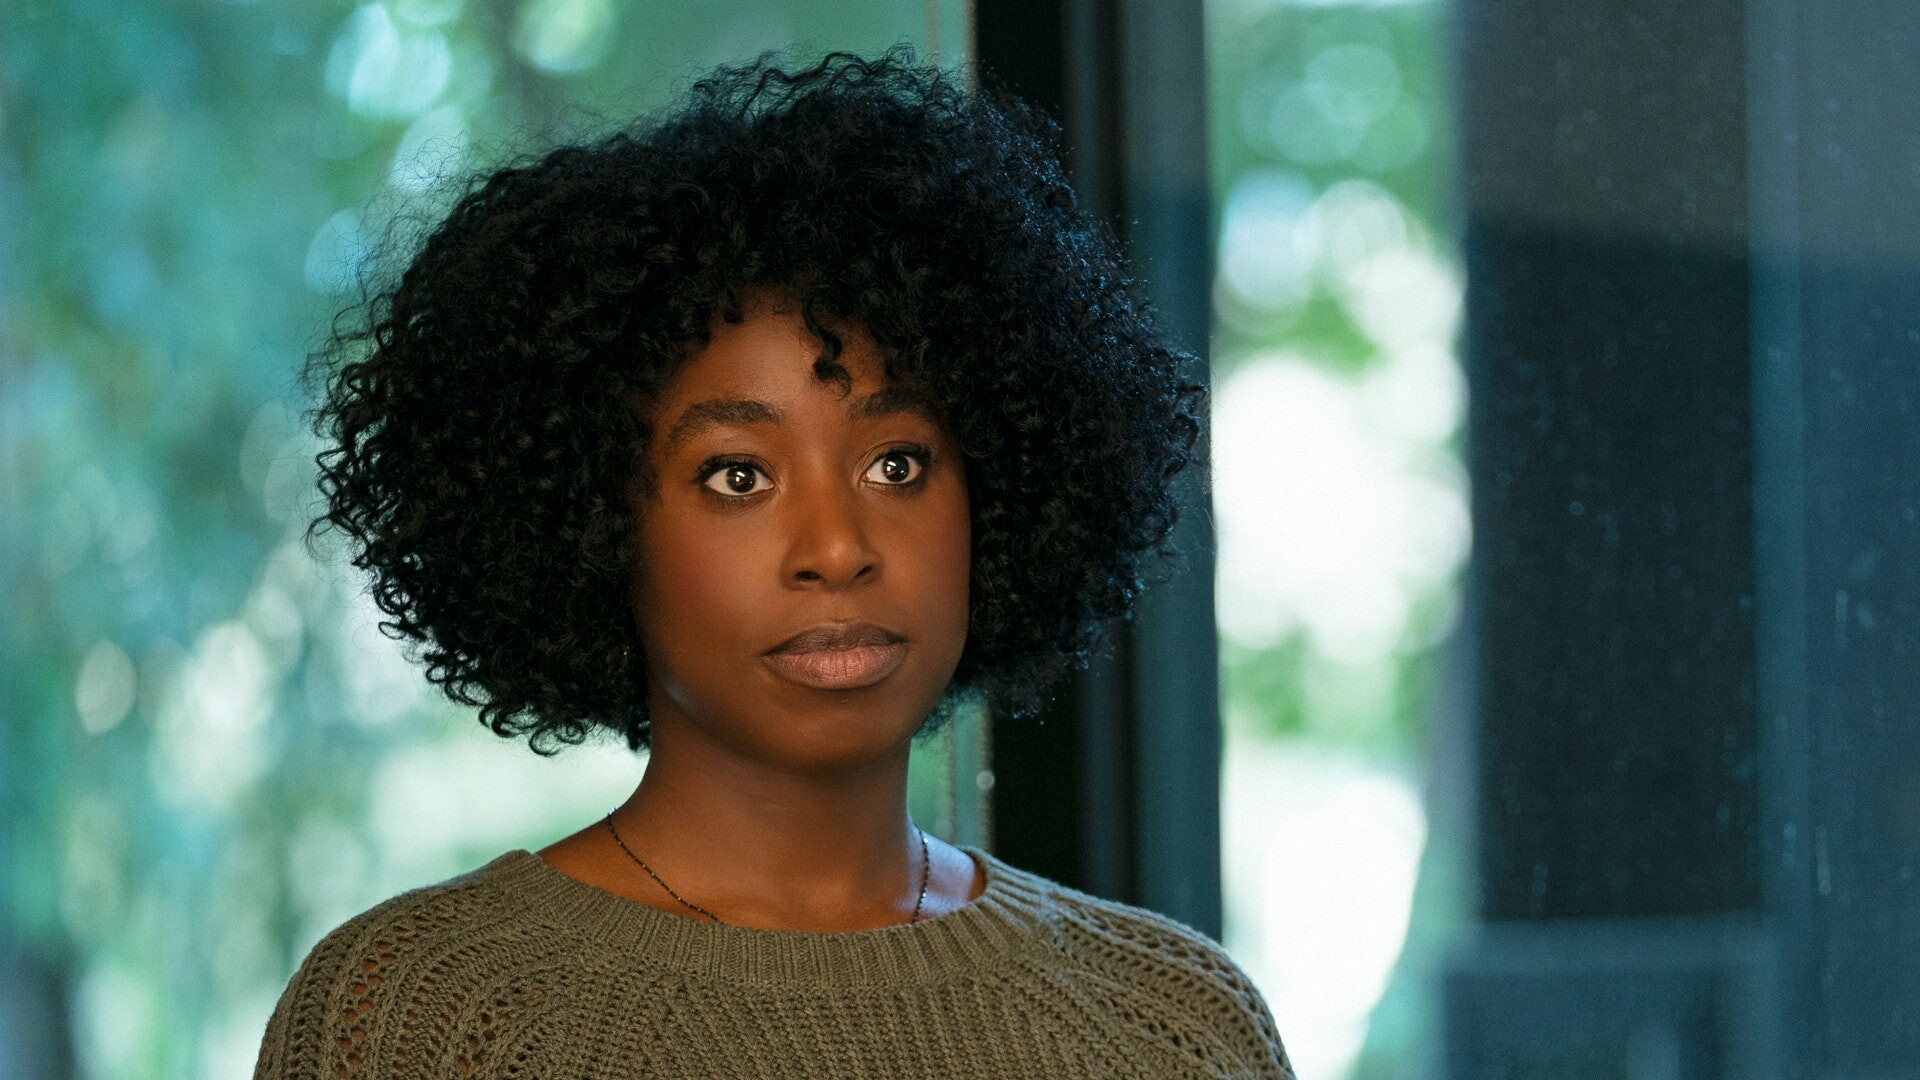 Why Women Kill: Kirby Howell-Baptiste as Taylor Harding, a bisexual, feminist attorney in an open marriage with Eli. 1920x1080 Full HD Wallpaper.